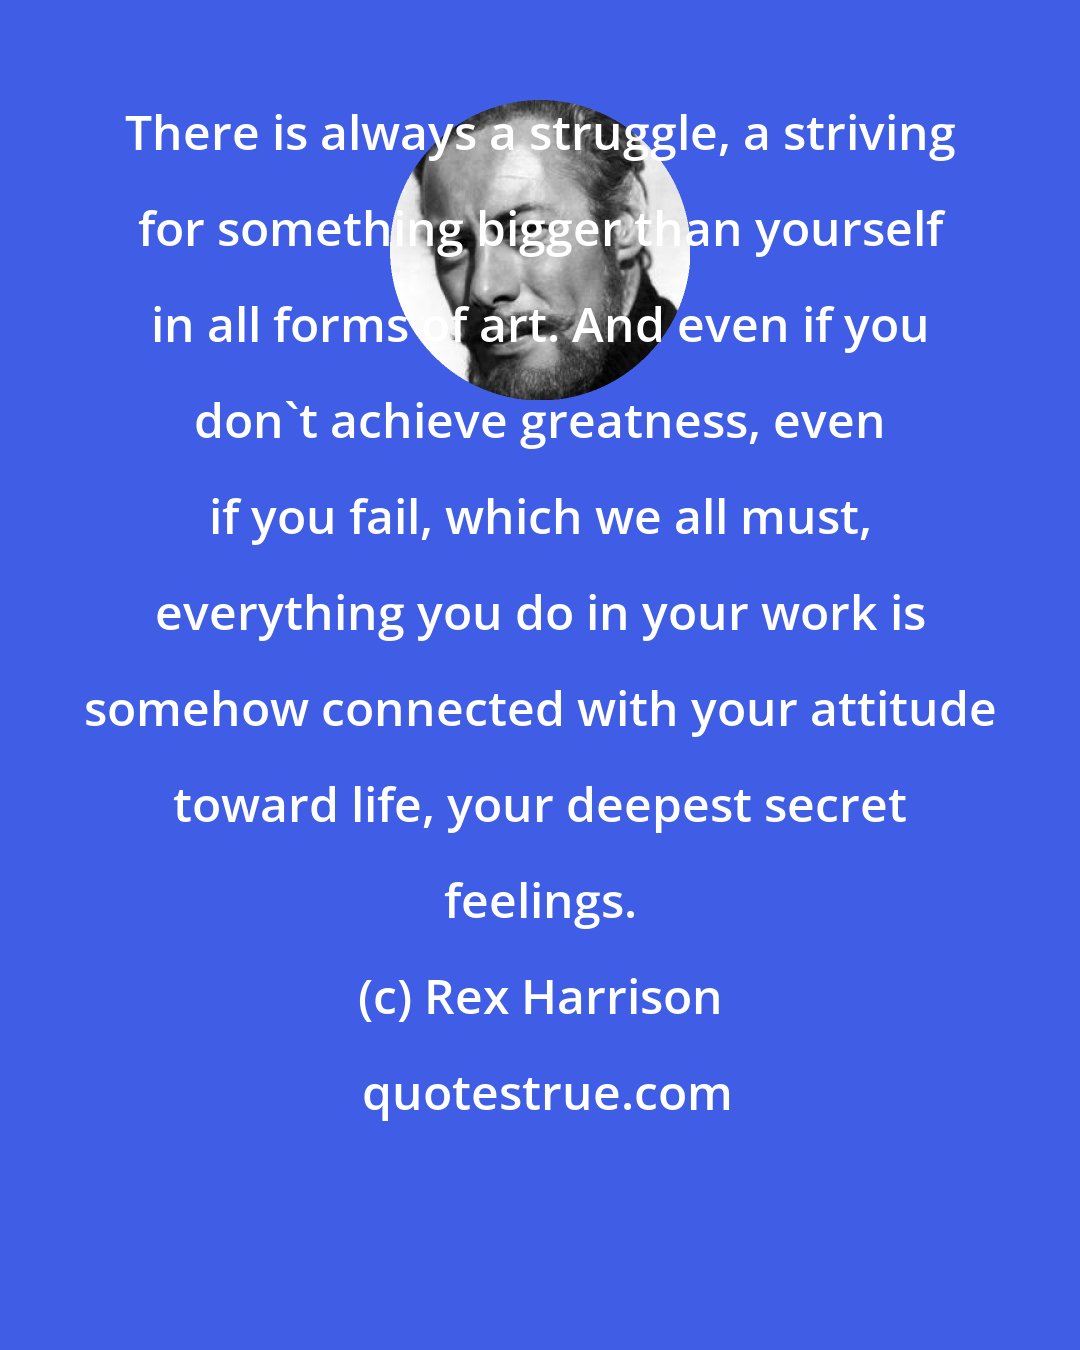 Rex Harrison: There is always a struggle, a striving for something bigger than yourself in all forms of art. And even if you don't achieve greatness, even if you fail, which we all must, everything you do in your work is somehow connected with your attitude toward life, your deepest secret feelings.